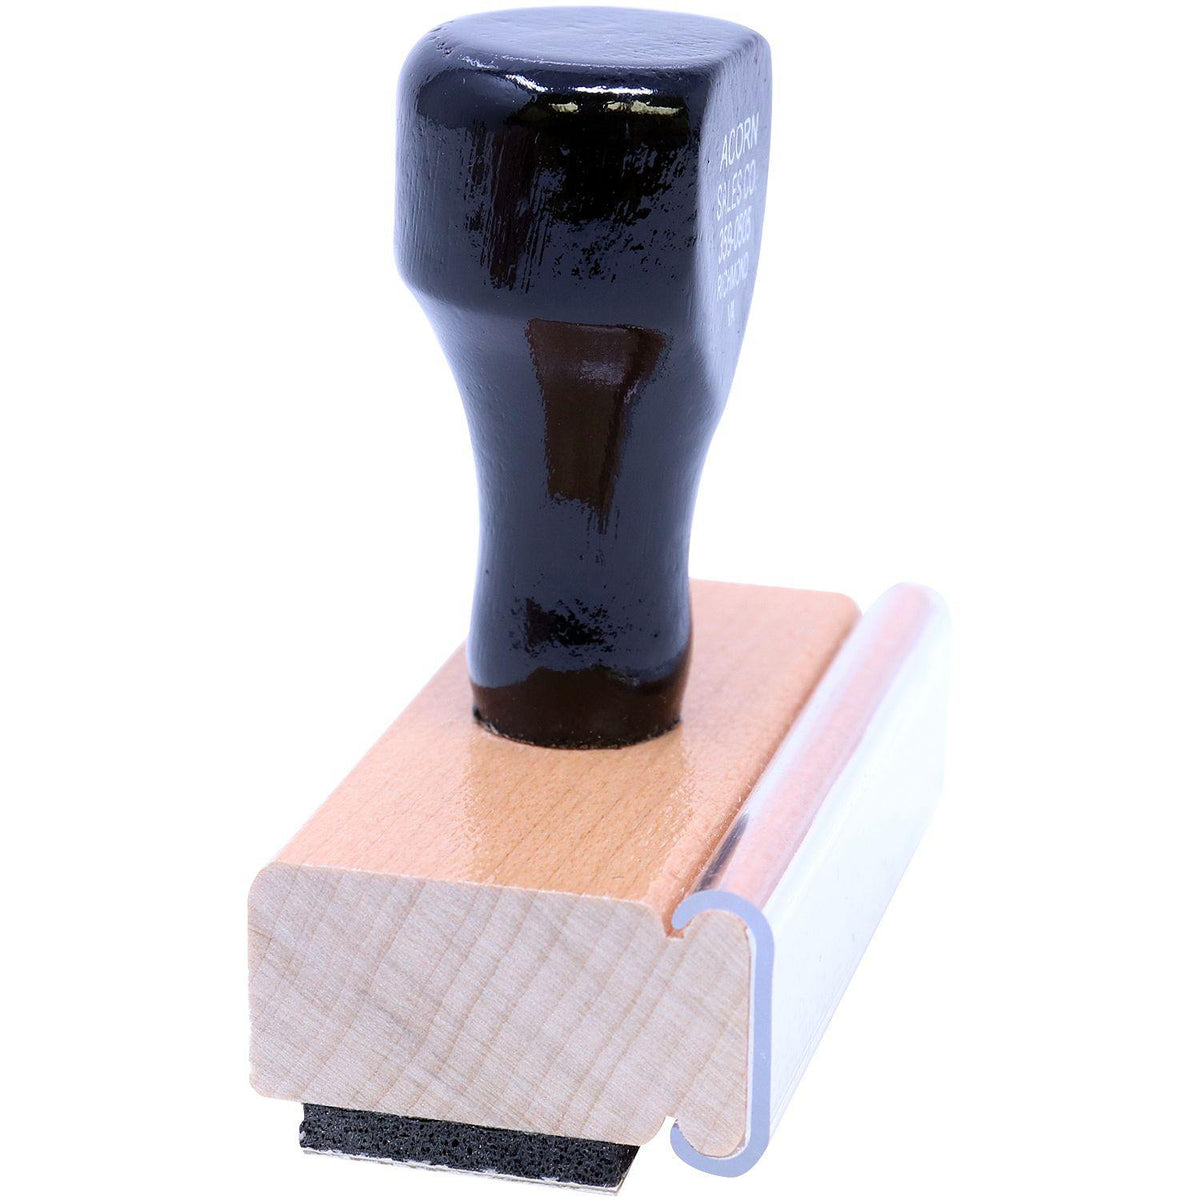 Side View of Client Copy Rubber Stamp at an Angle